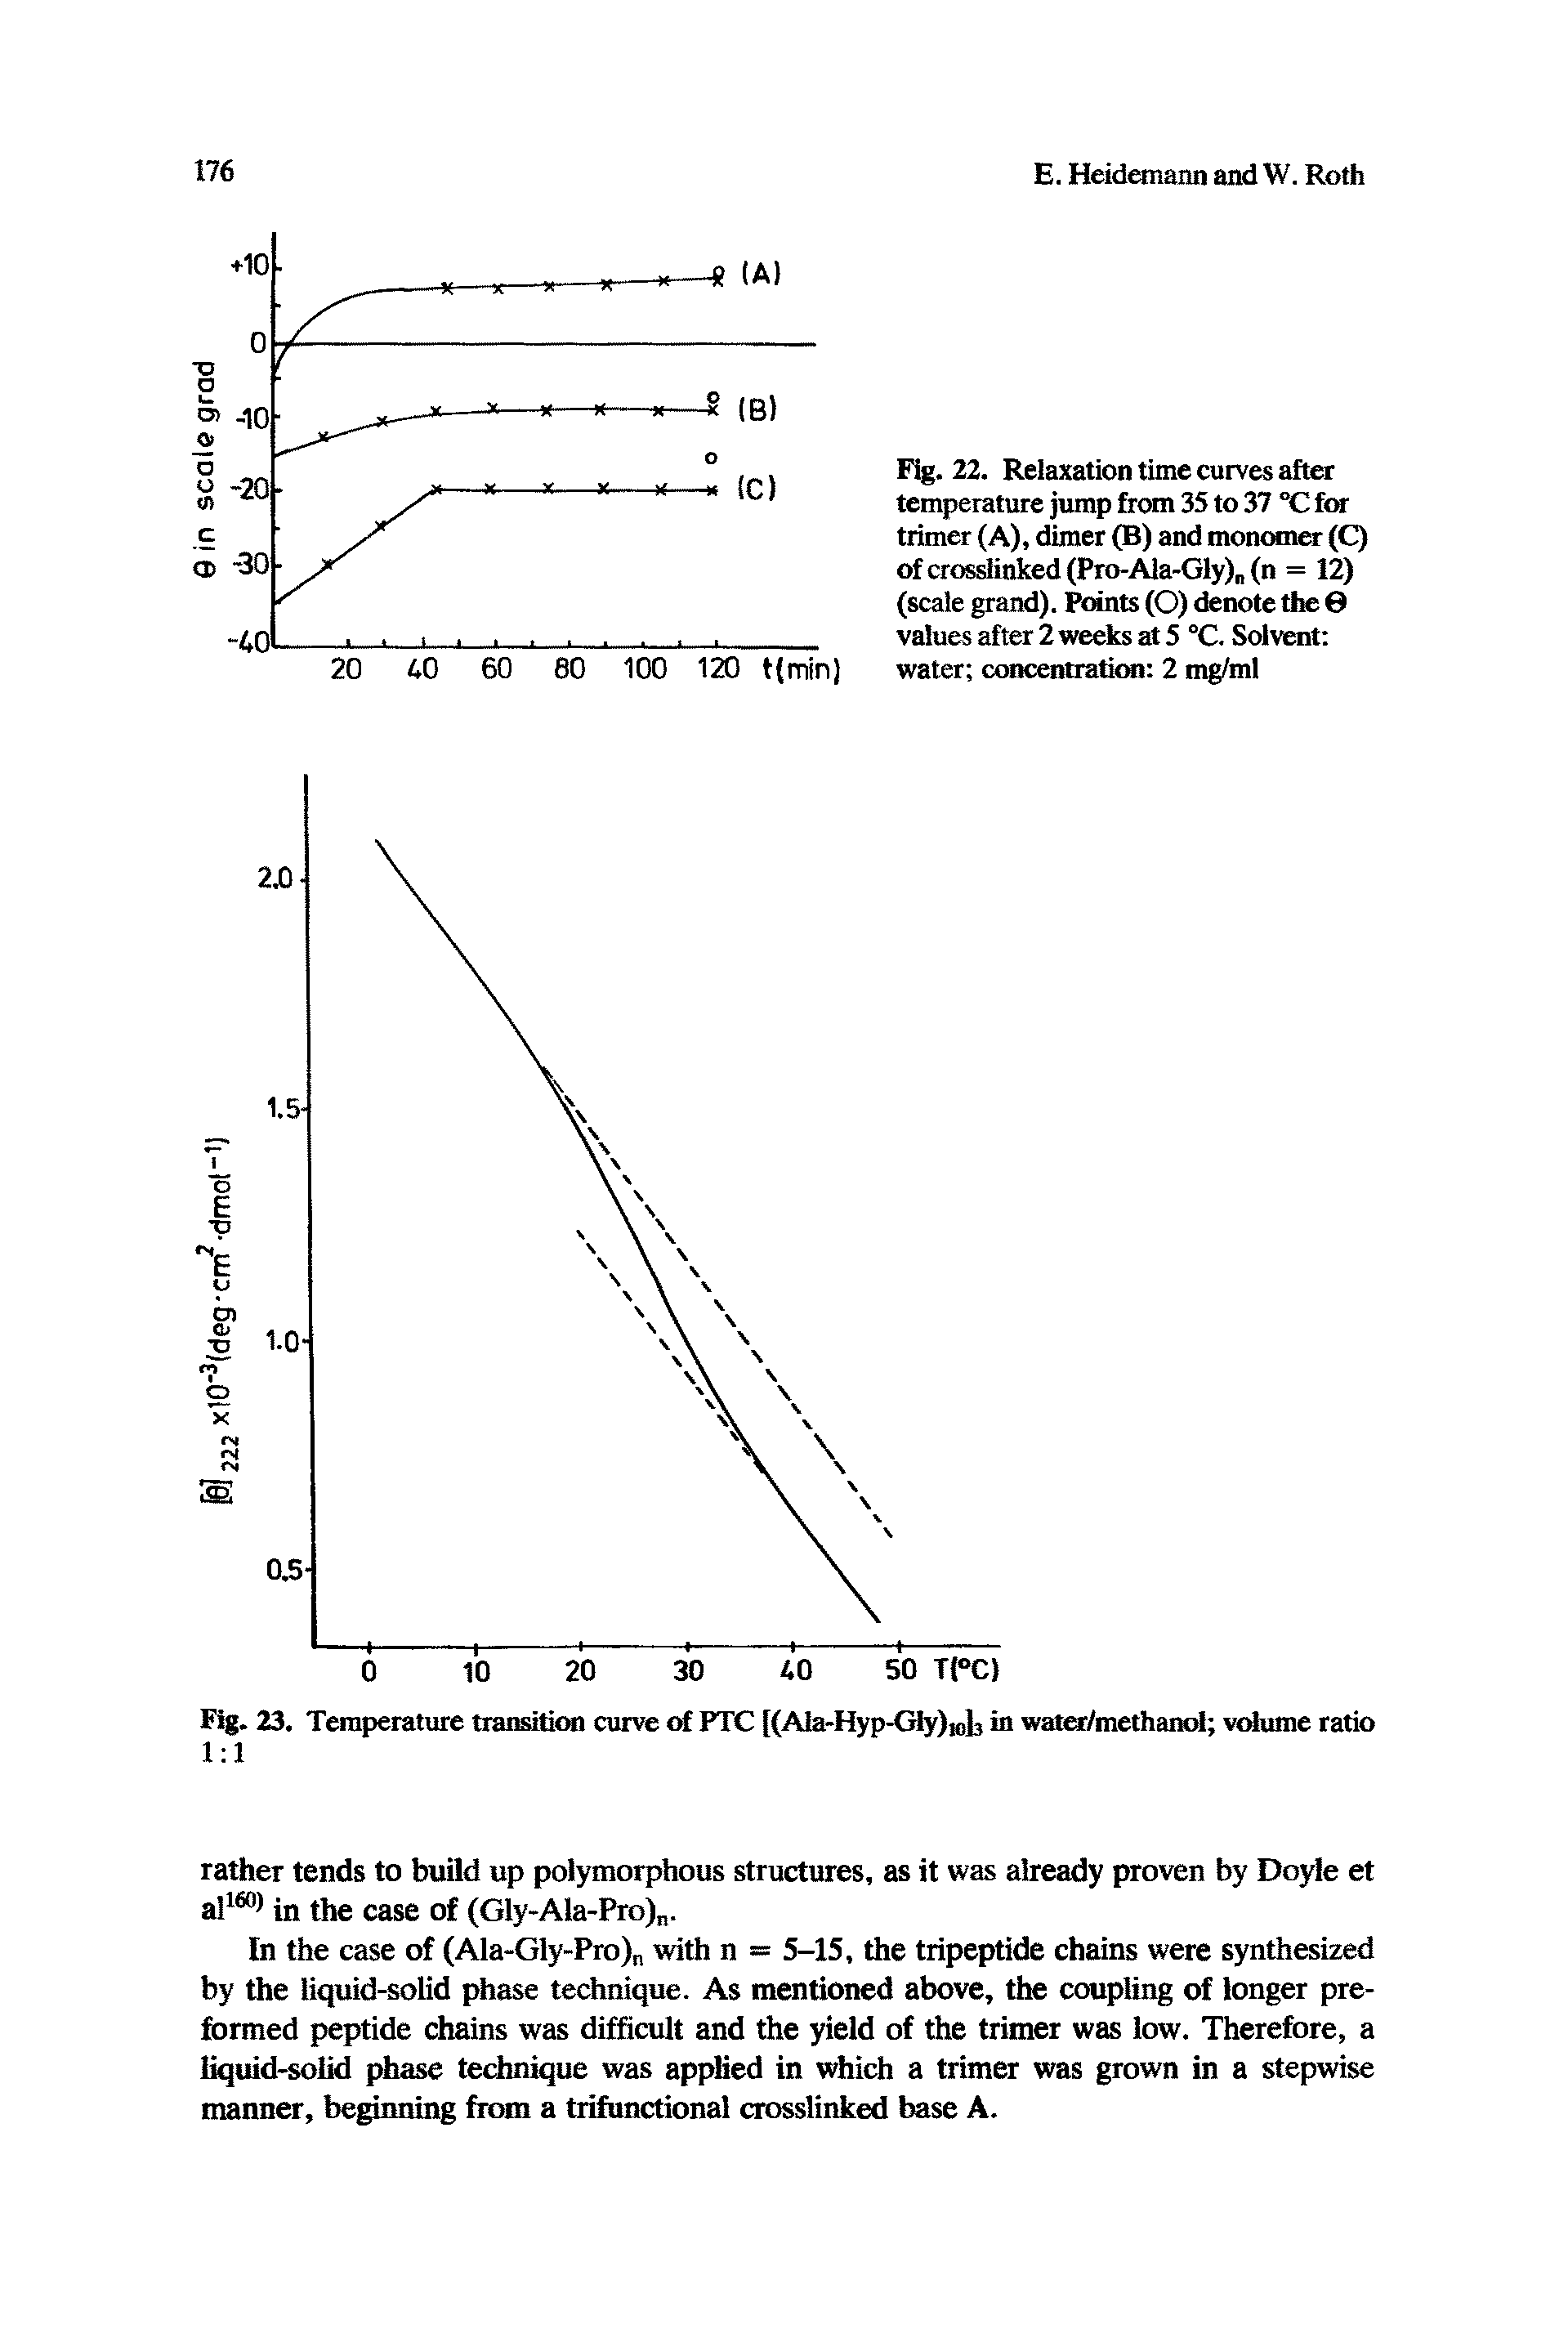 Fig. 22. Relaxation time curves after temperature jump from 35 to 37 °C for trimer (A), dimer (B) and monomer (C) of crosslinked (Pro-Ala-Gly) (n = 12) (scale grand). Pants (O) denote the 0 values after 2 weeks at 5 °C. Solvent water concentration 2 mg/ml...